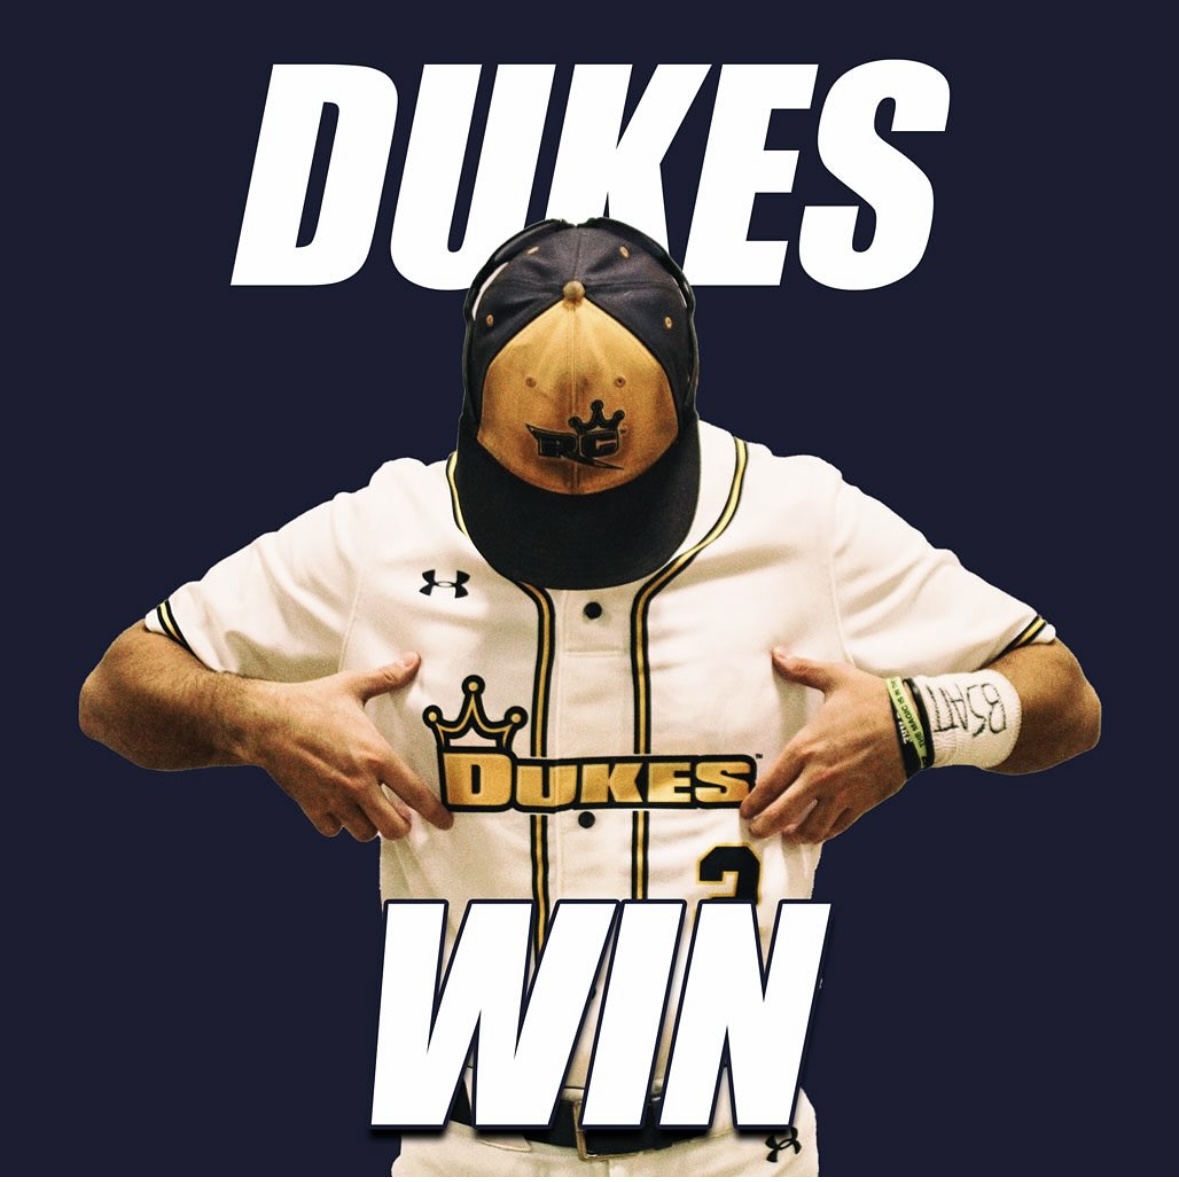 Dukes win first series of the season